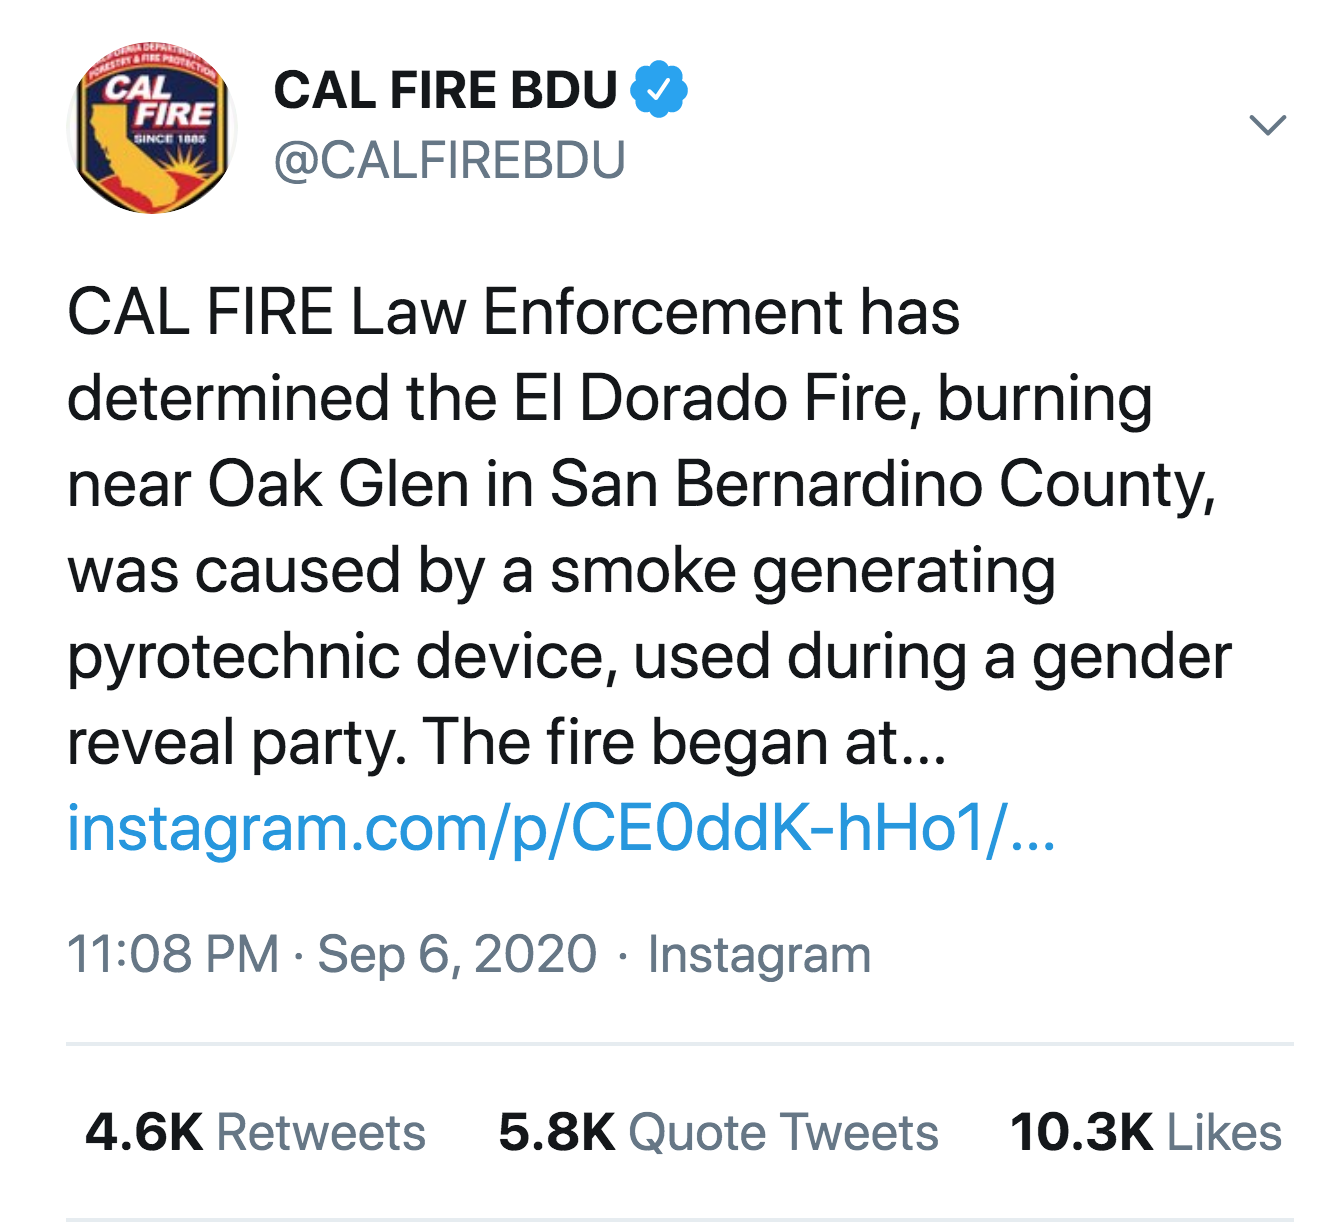 Cal Fire Cal Fire Bdu Since 1805 Cal Fire Law Enforcement has determined the El Dorado Fire, burning near Oak Glen in San Bernardino County, was caused by a smoke generating pyrotechnic device, used during a gender reveal party. The fire…